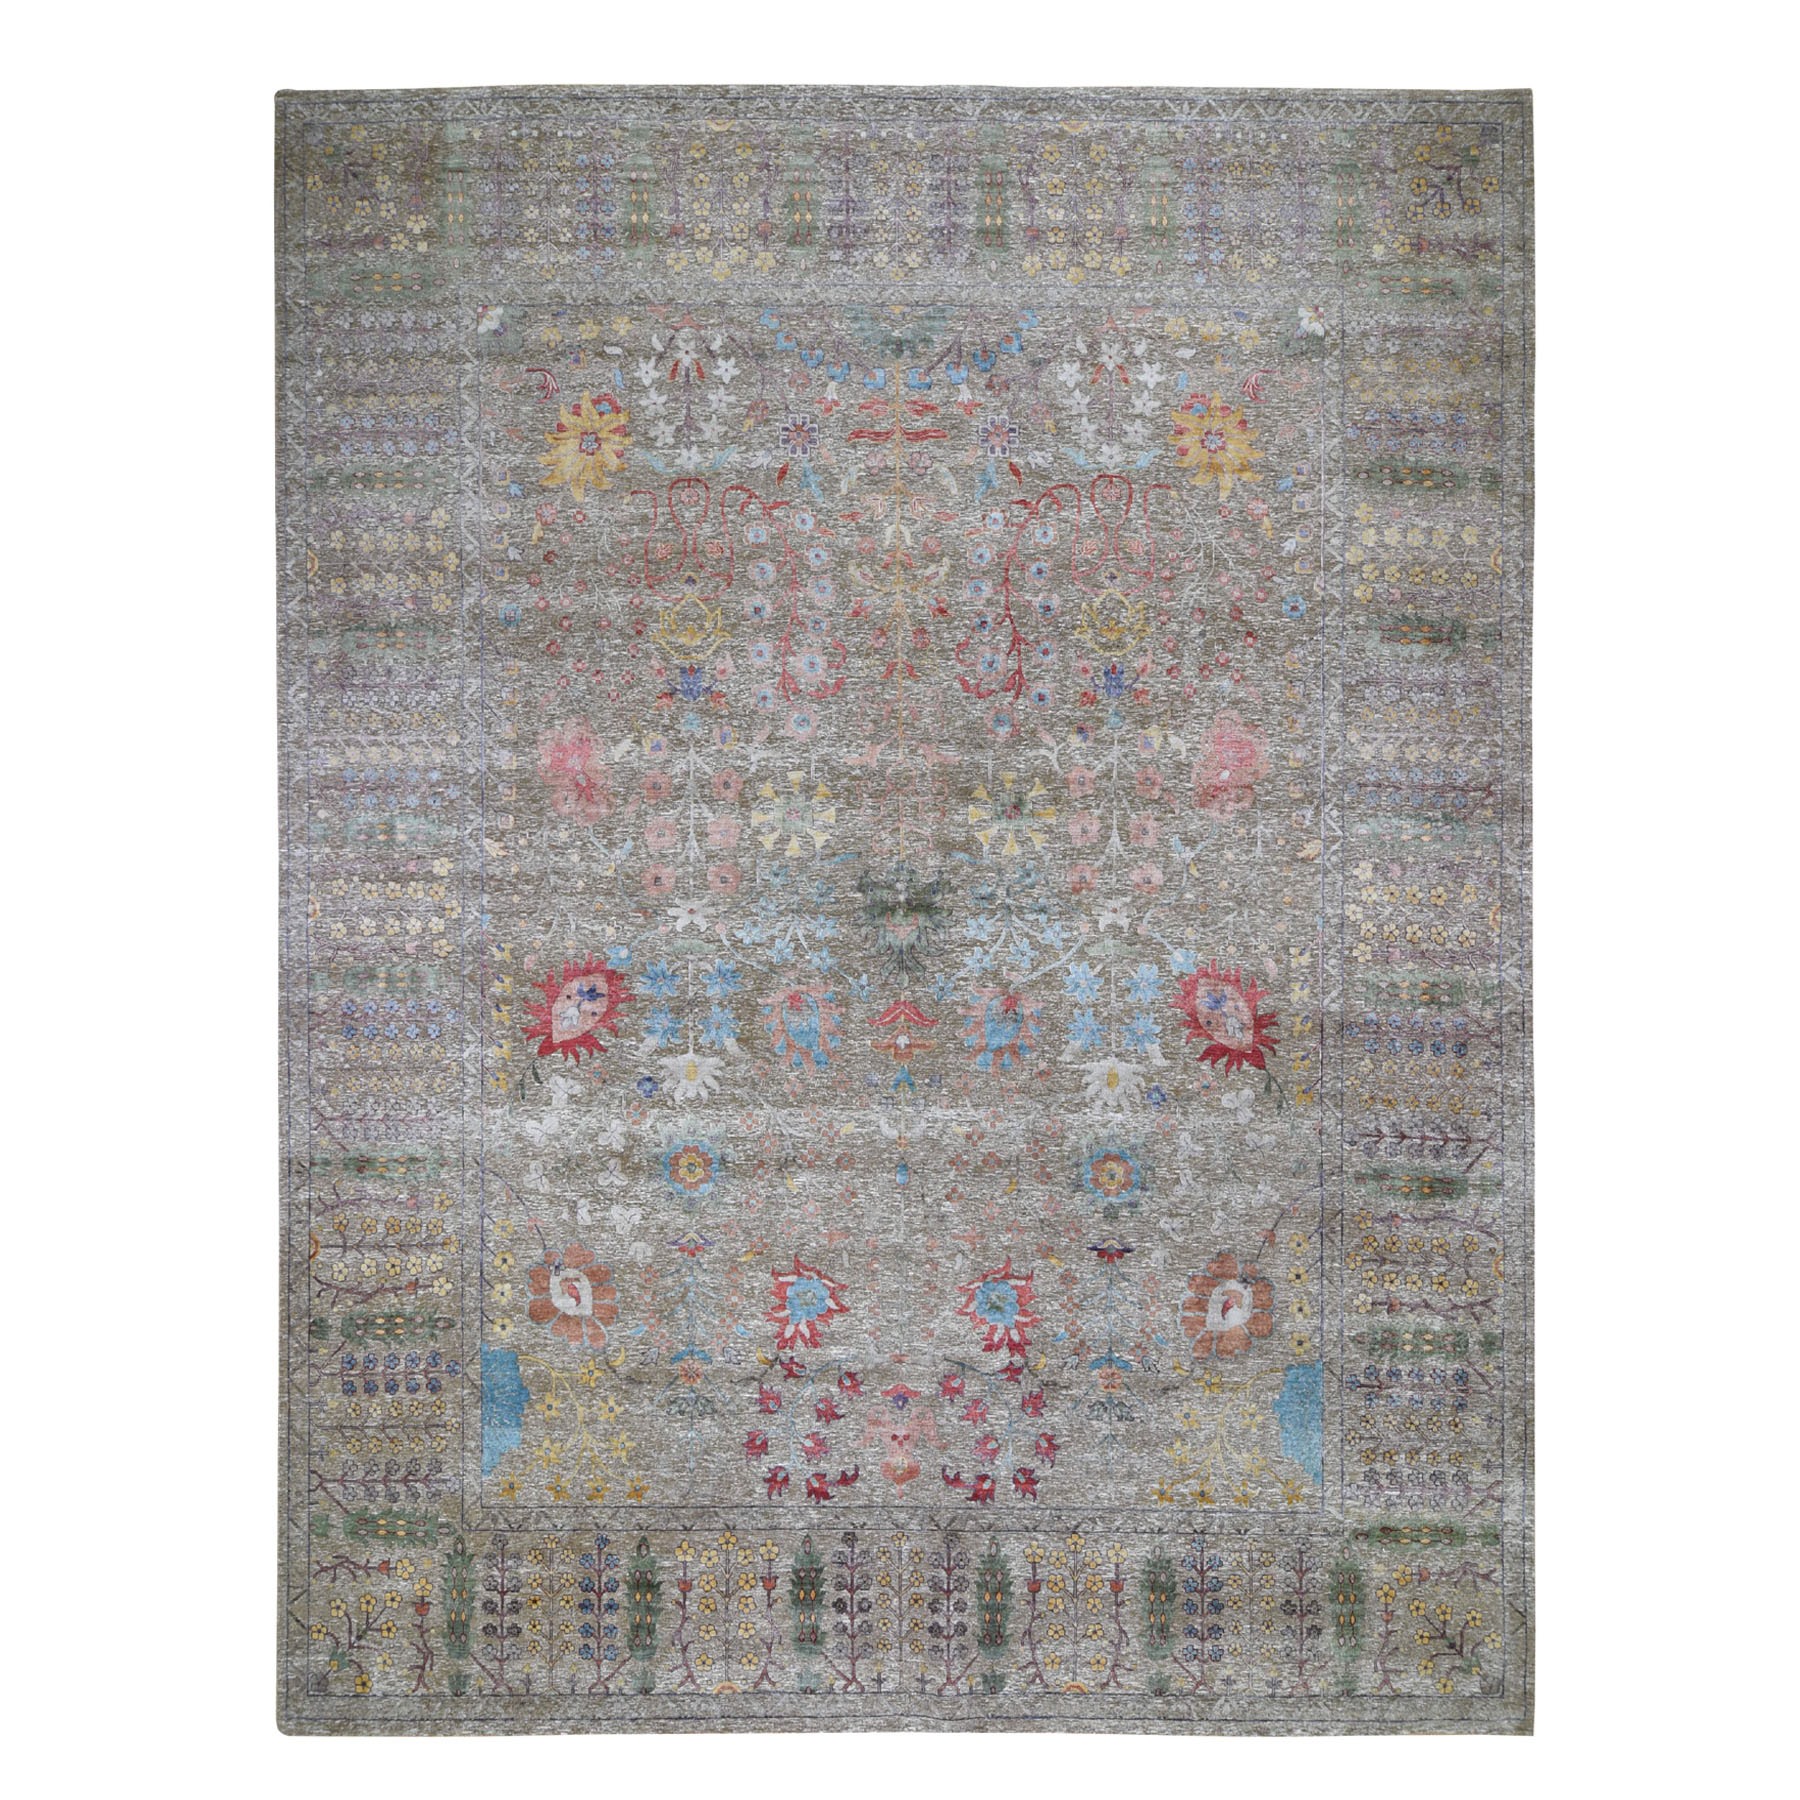 12'X14'10" Oversized Honey Brown Silk With Textured Wool Vaze Design Hand Knotted Oriental Rug moad8c7a